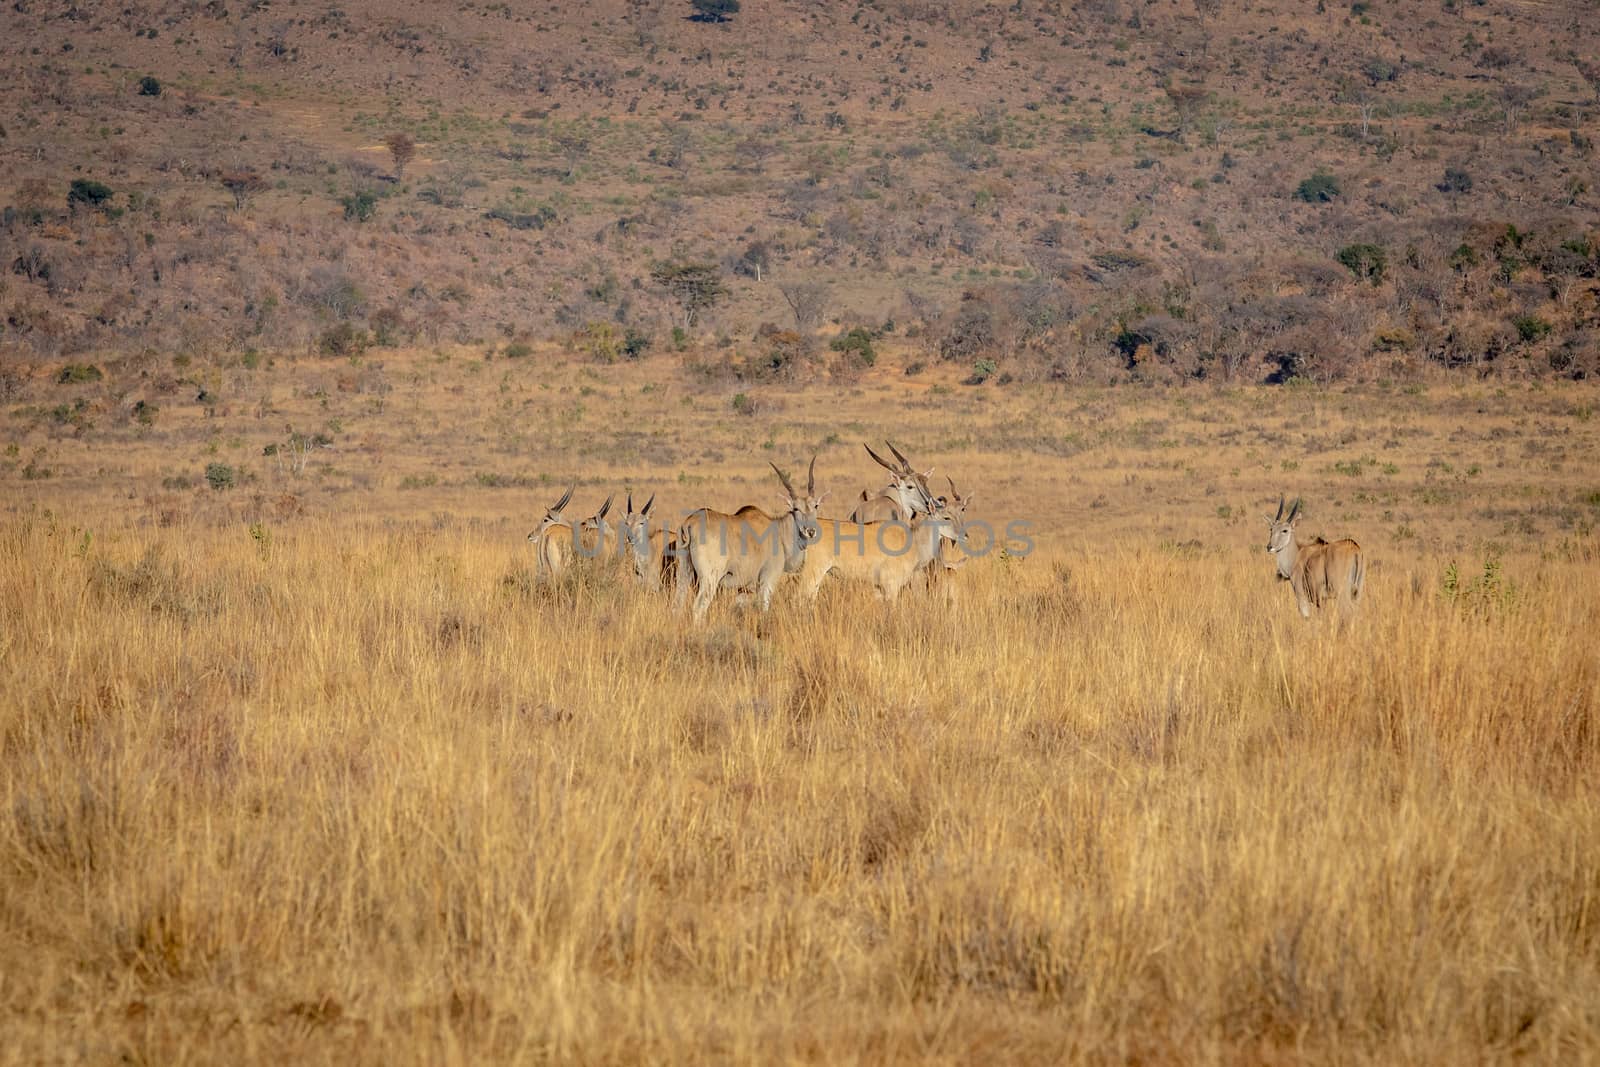 Herd of Elands in the high grass in the Welgevonden game reserve, South Africa.